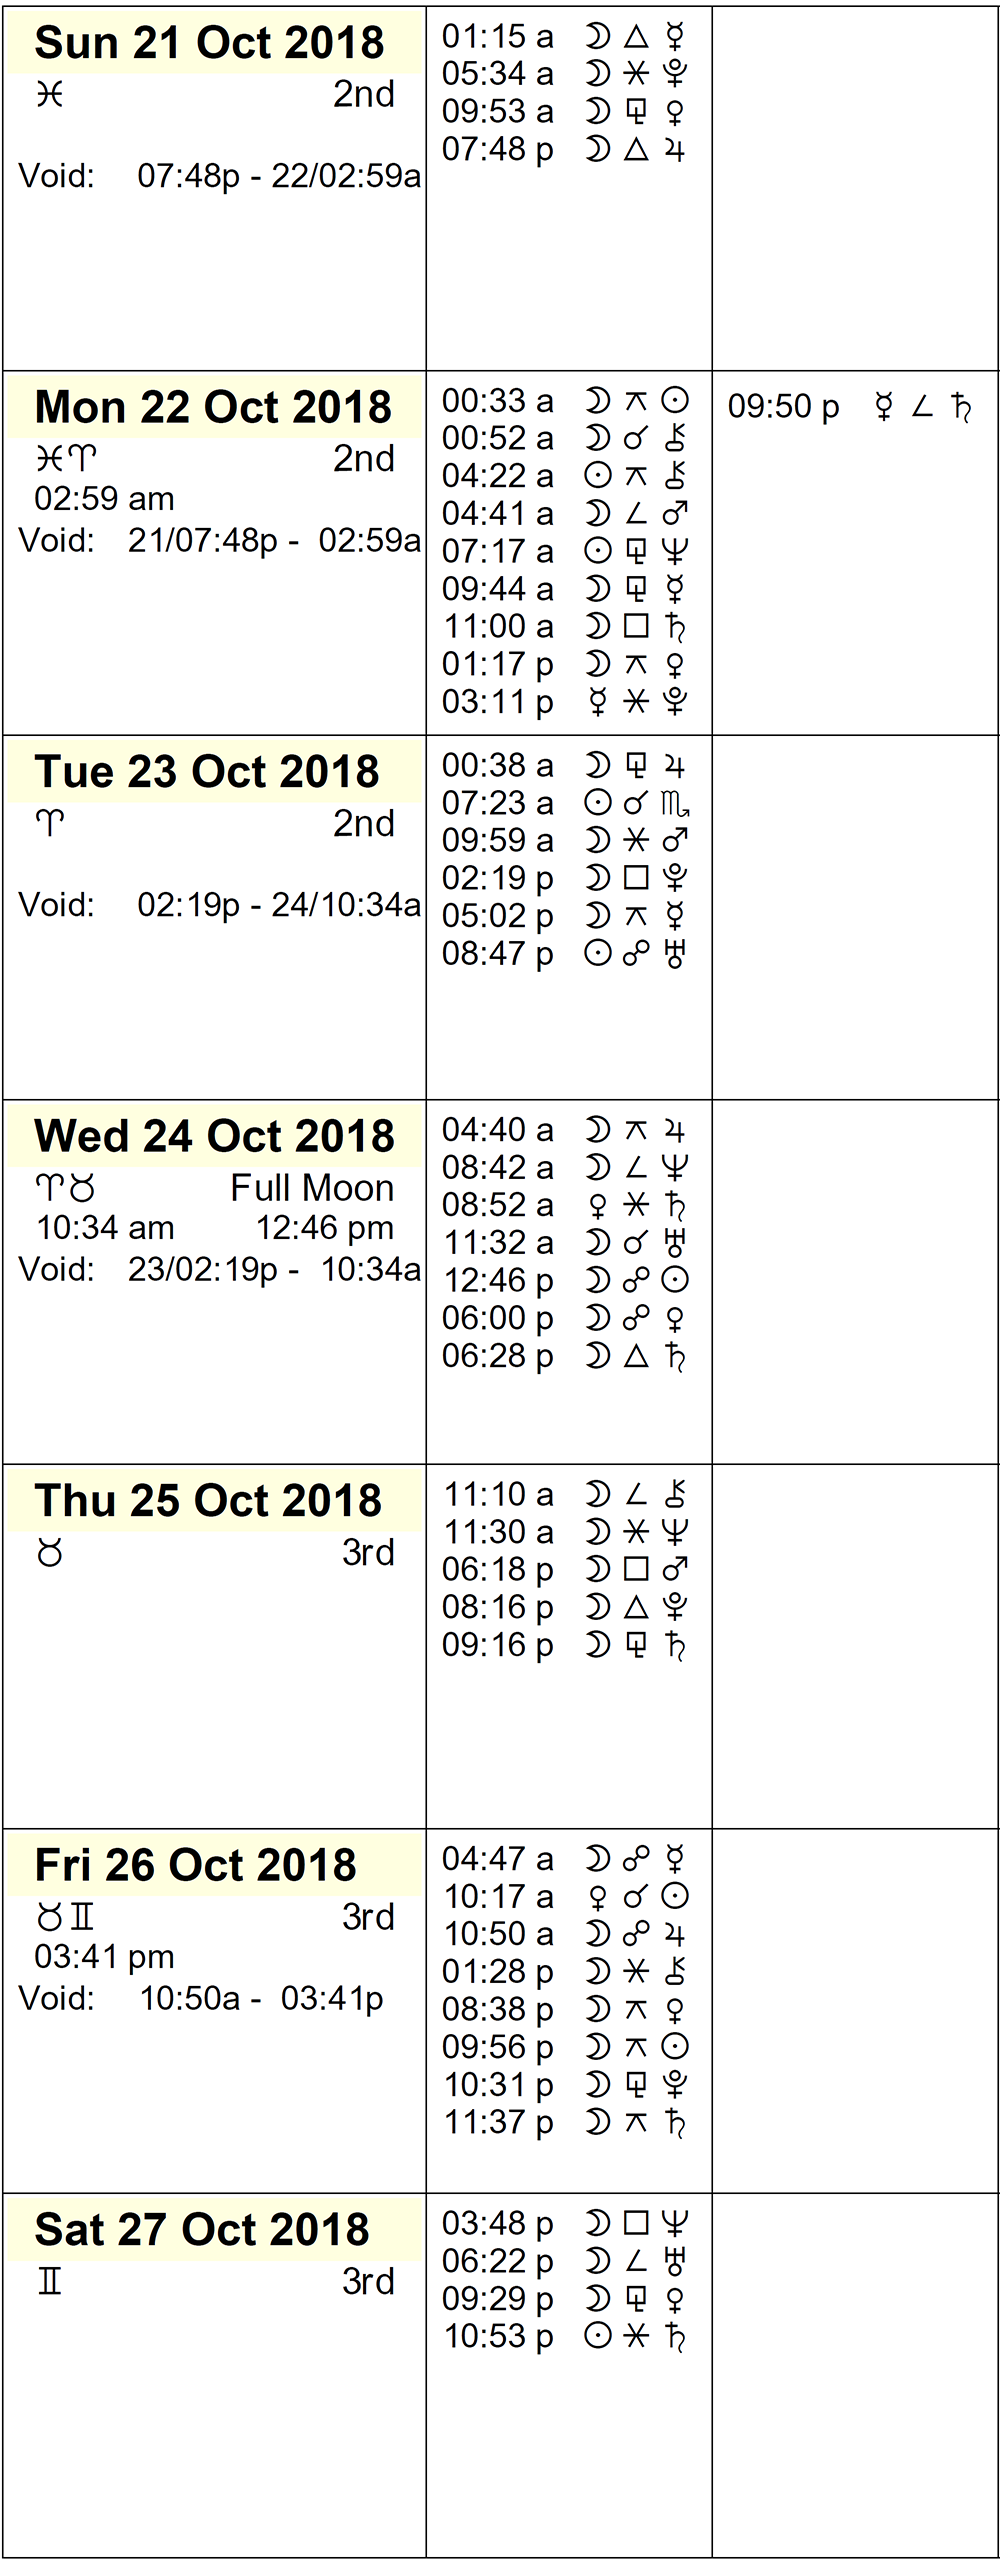 This Week in Astrology Calendar - October 21st to 27th, 2018